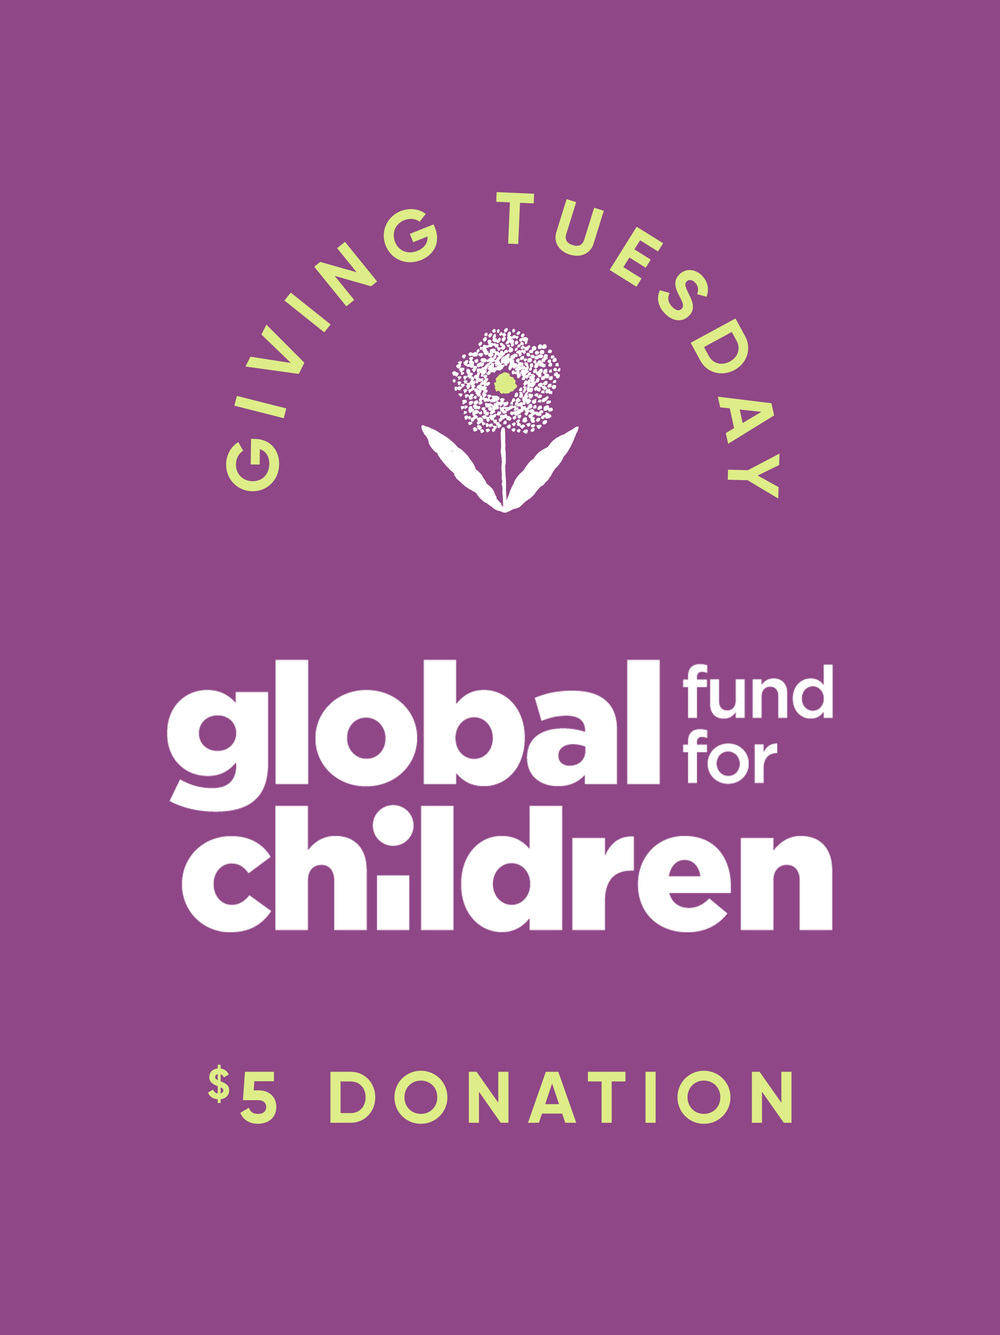 Donate $5 to Global Fund for Children